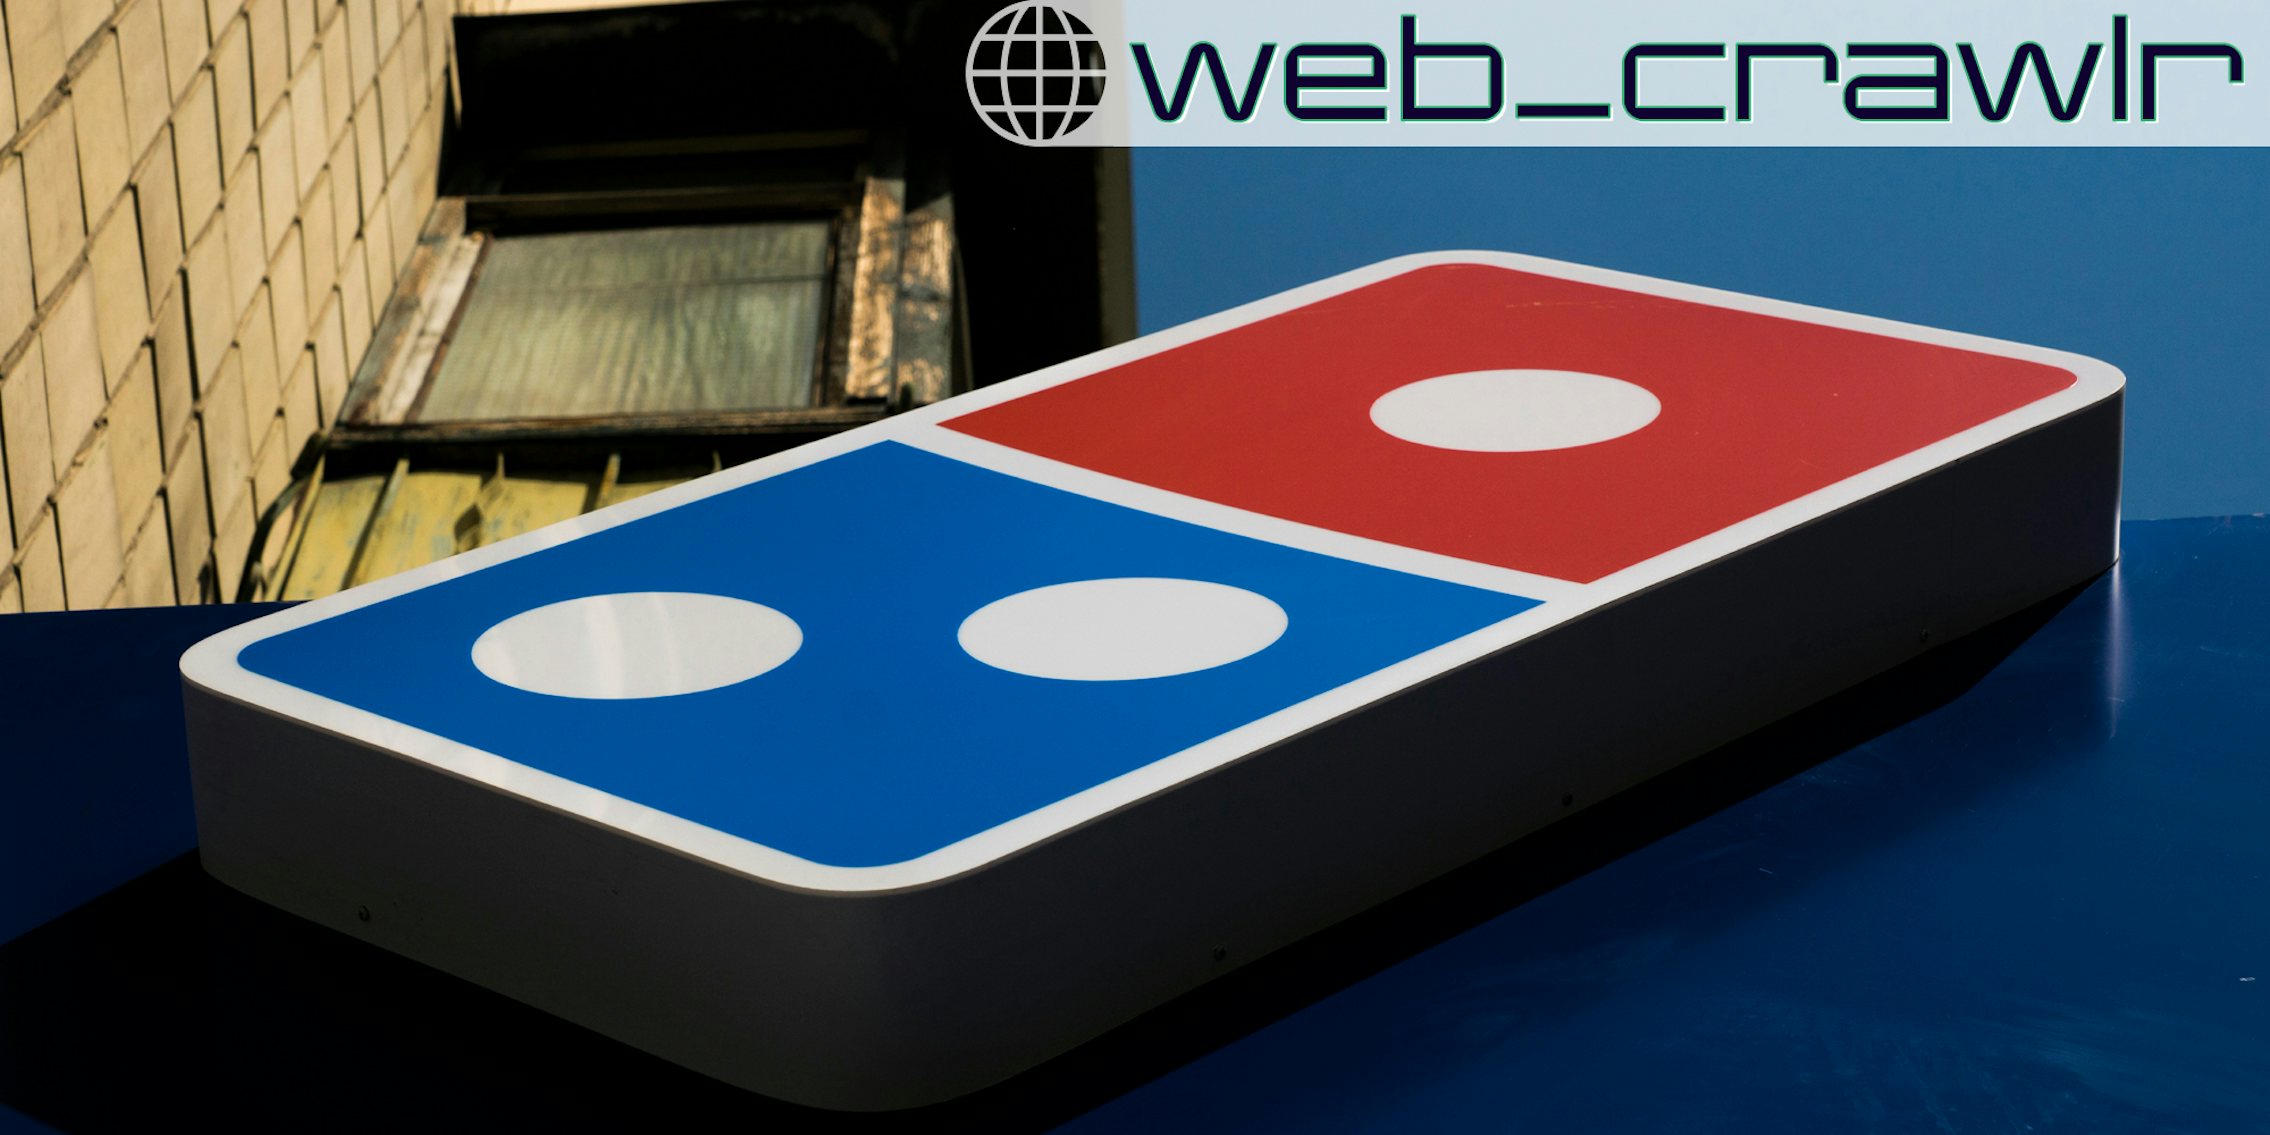 A Domino's sign. The Daily Dot newsletter web_crawlr newsletter is in the top right corner.